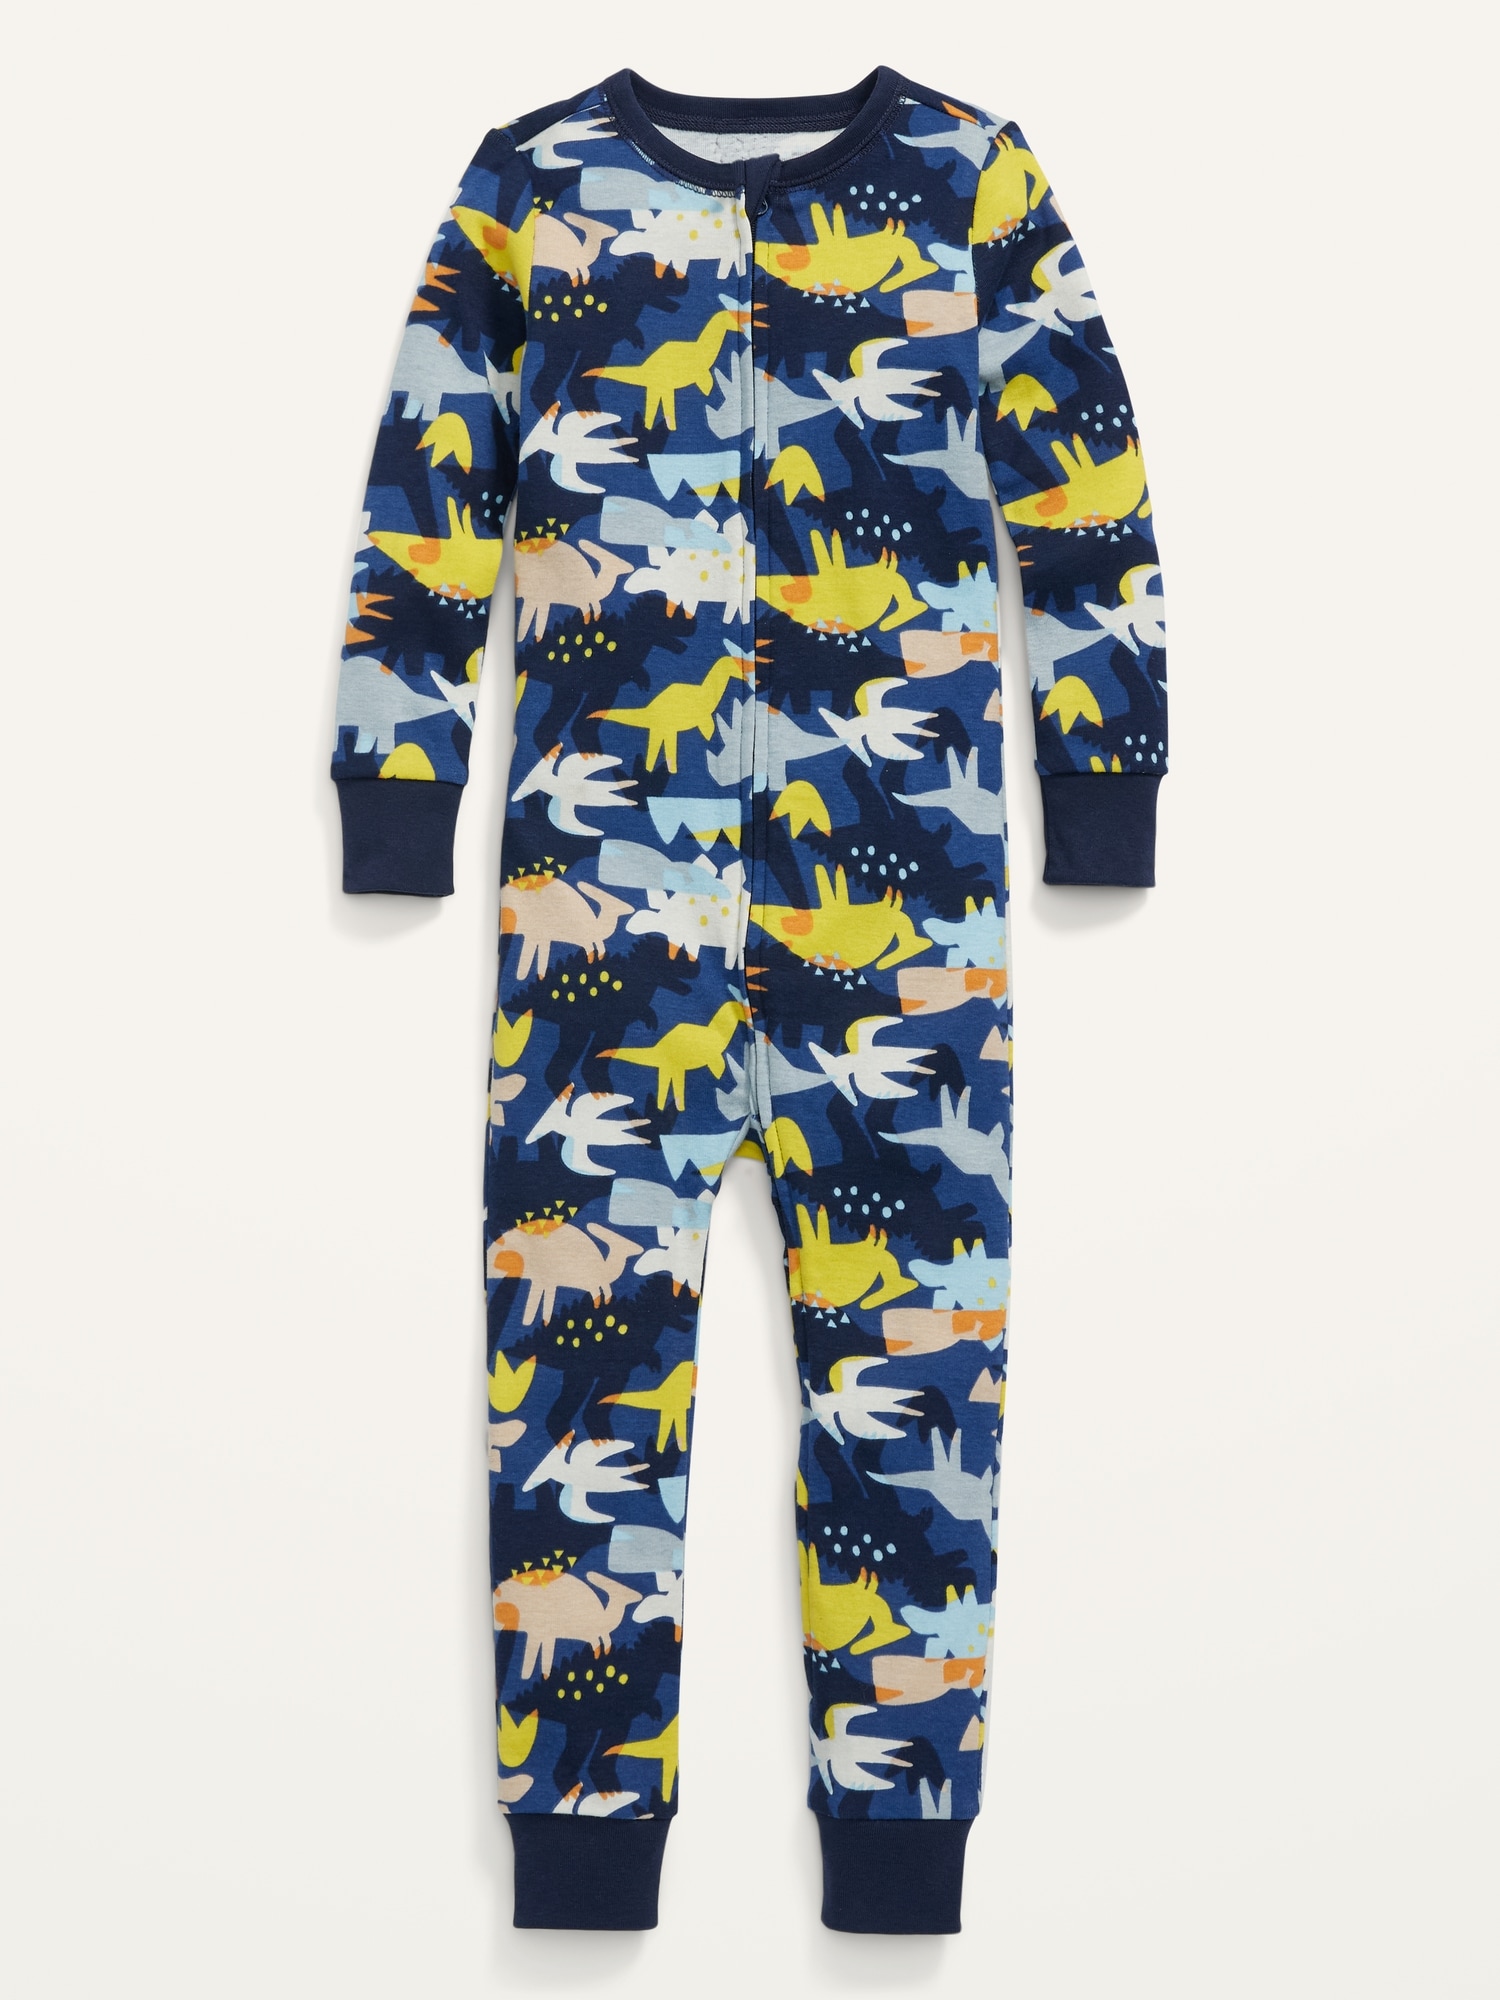 Unisex 1-Way-Zip Printed Snug-Fit Pajama One-Piece for Toddler & Baby